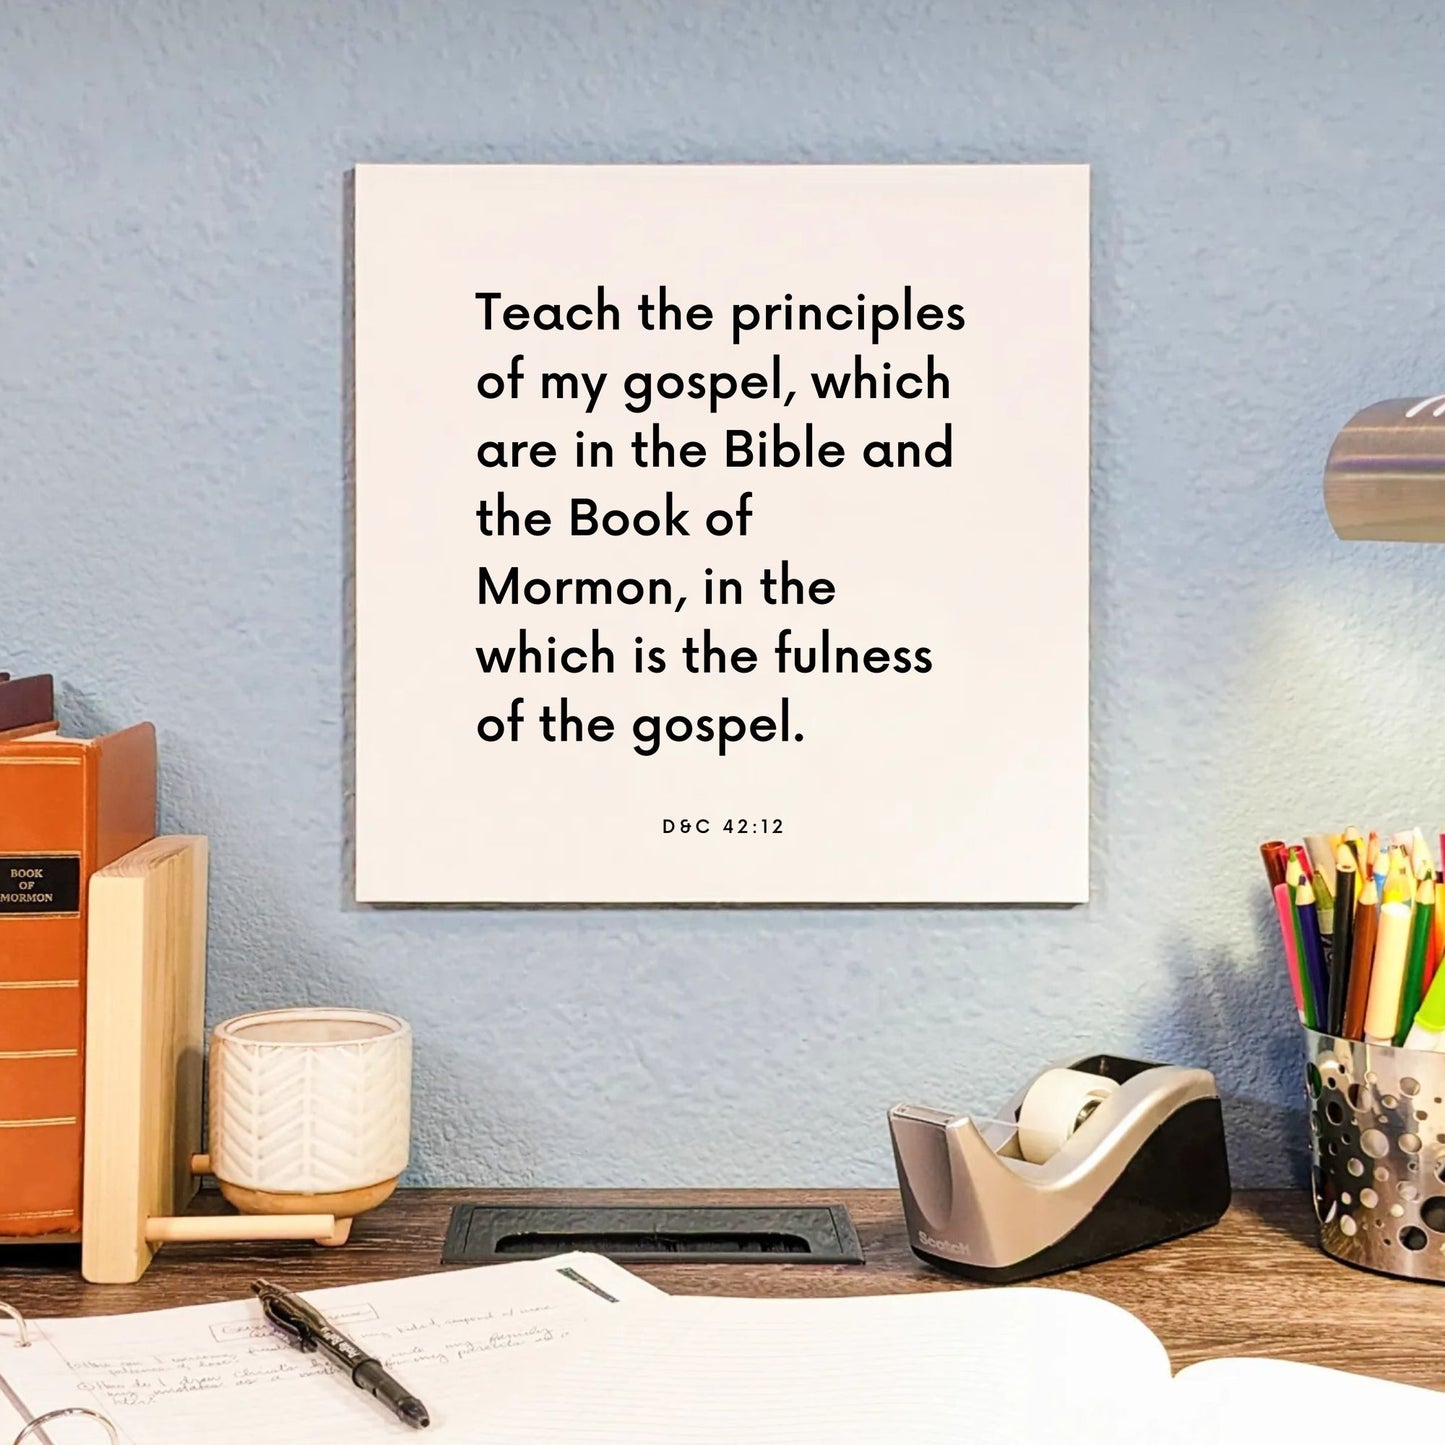 Desk mouting of the scripture tile for D&C 42:12 - "In the which is the fulness of the gospel"